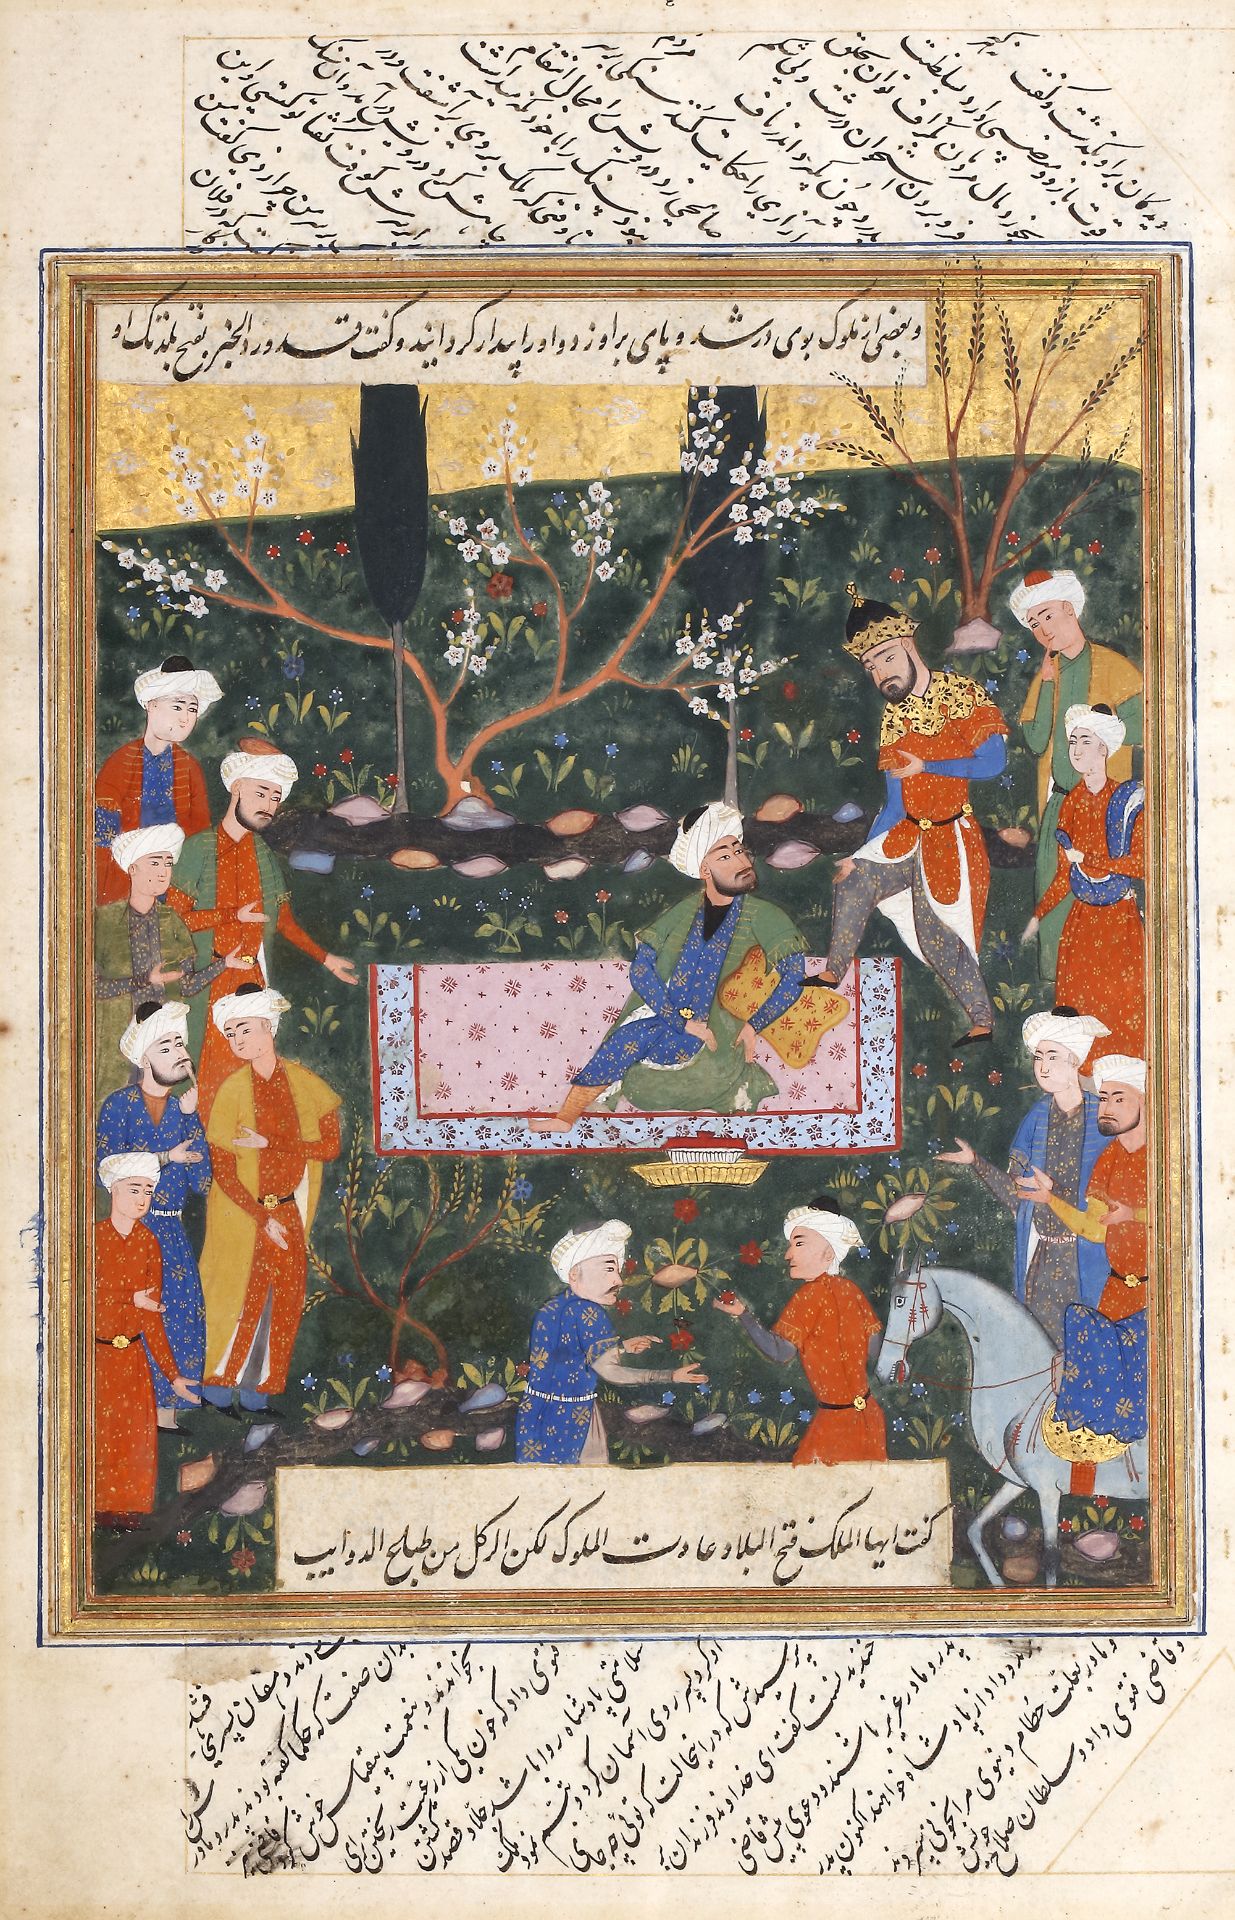 A MINIATURE, THE RETURN OF THE KING, QAZVIN OR SHIRAZ, 1570-1580 AD, CENTRAL ASIA - Image 2 of 2